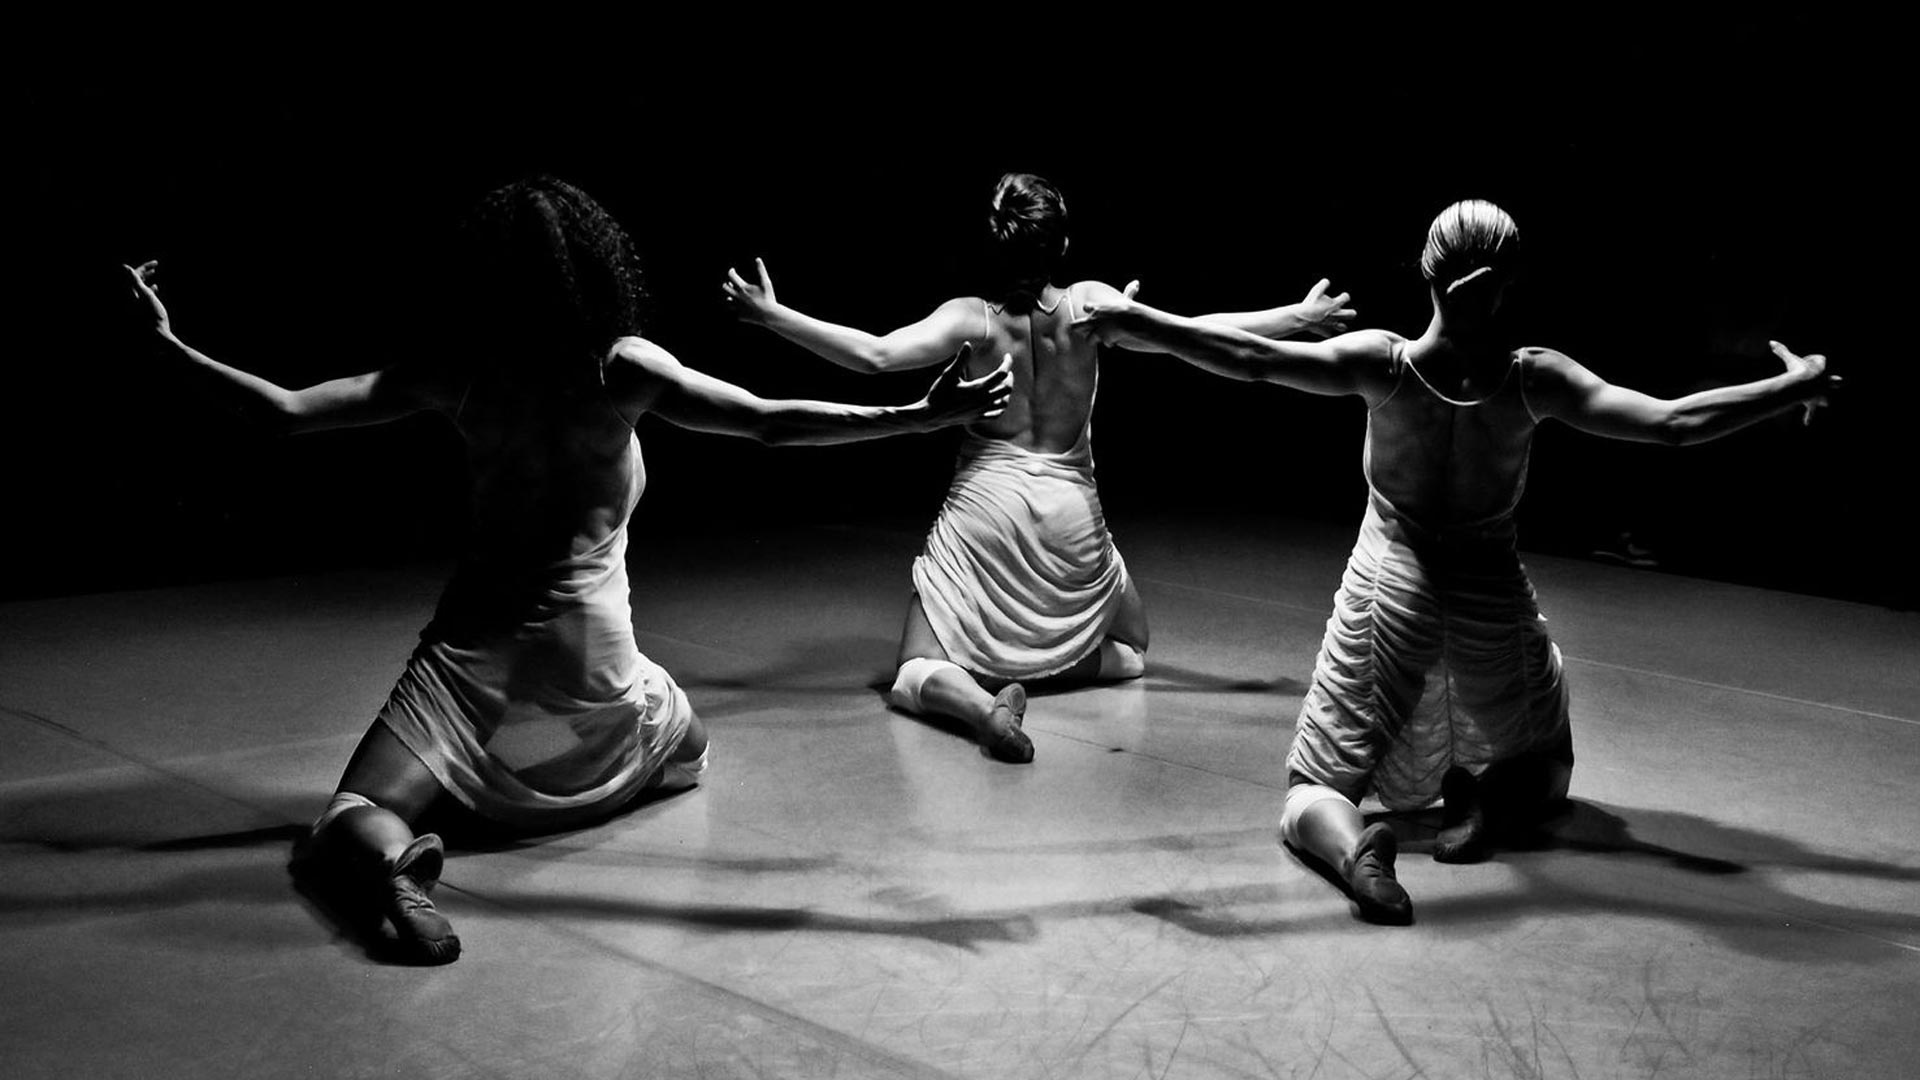 Contemporary Dance: Up2Dance project, Dance training programs, Teaching and performing, Dance Training Center. 1920x1080 Full HD Wallpaper.